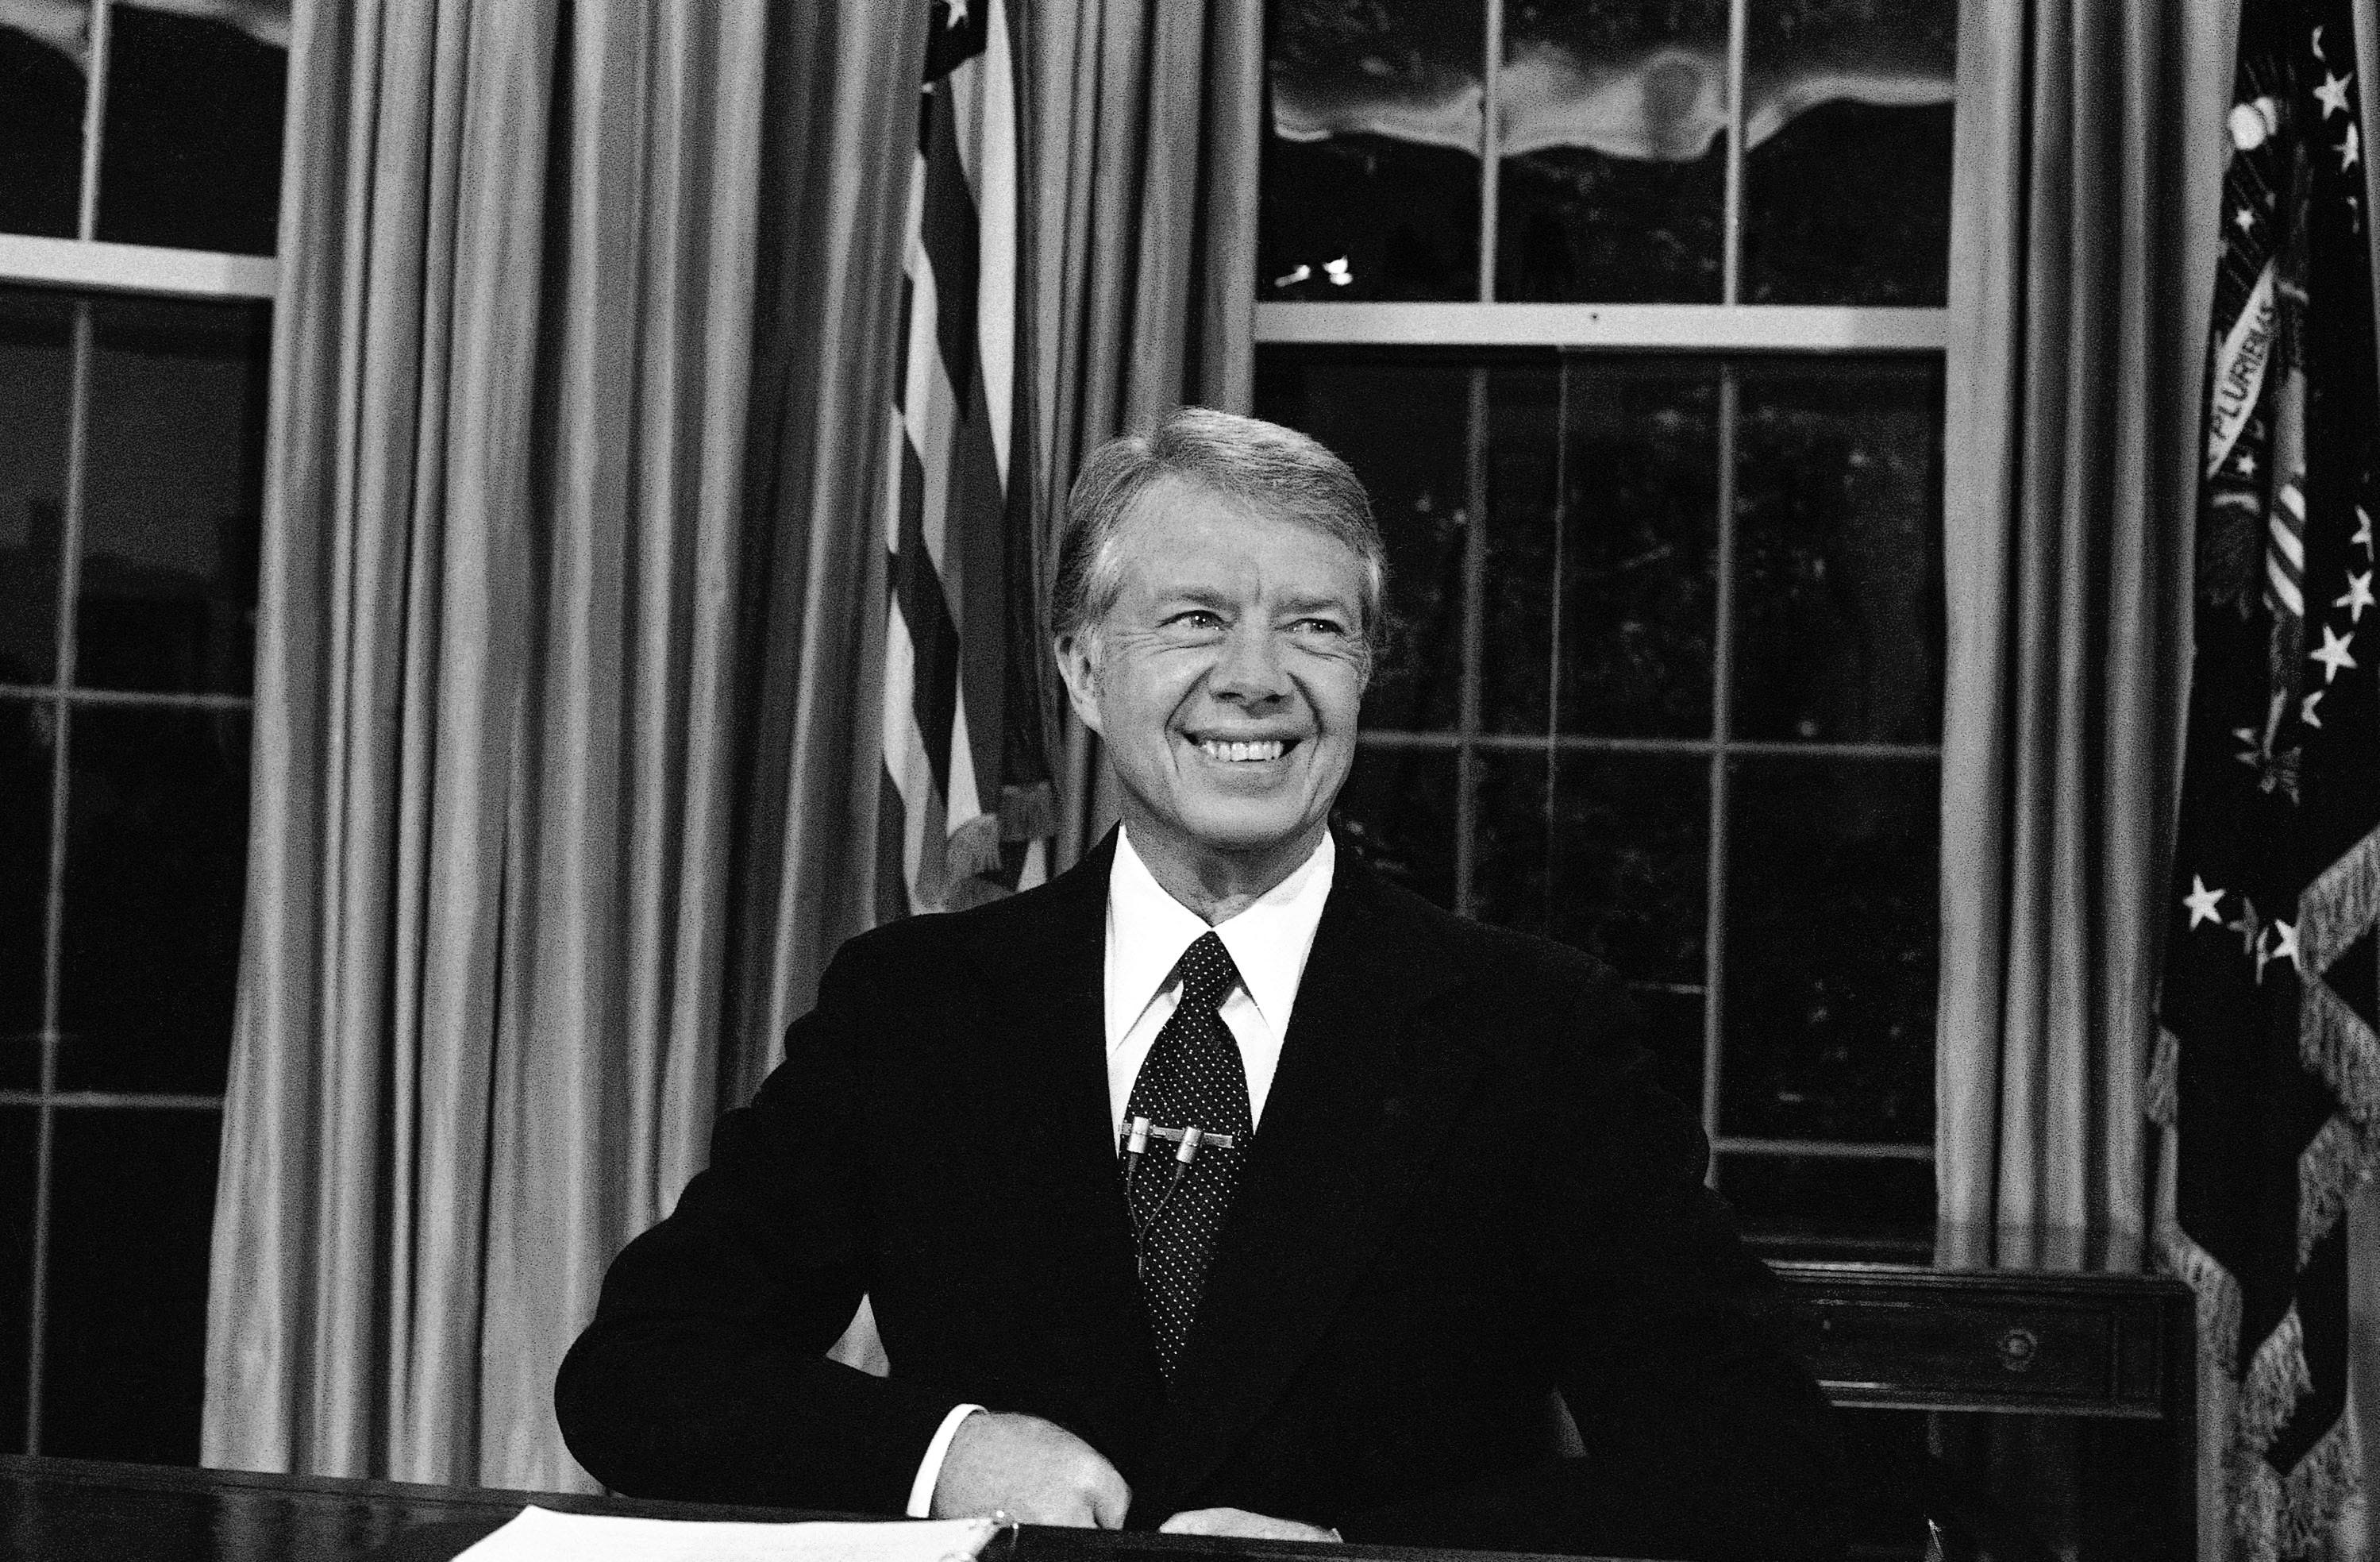 Jimmy Carter believes Black lives matter. Would his decency be considered 'woke' today?